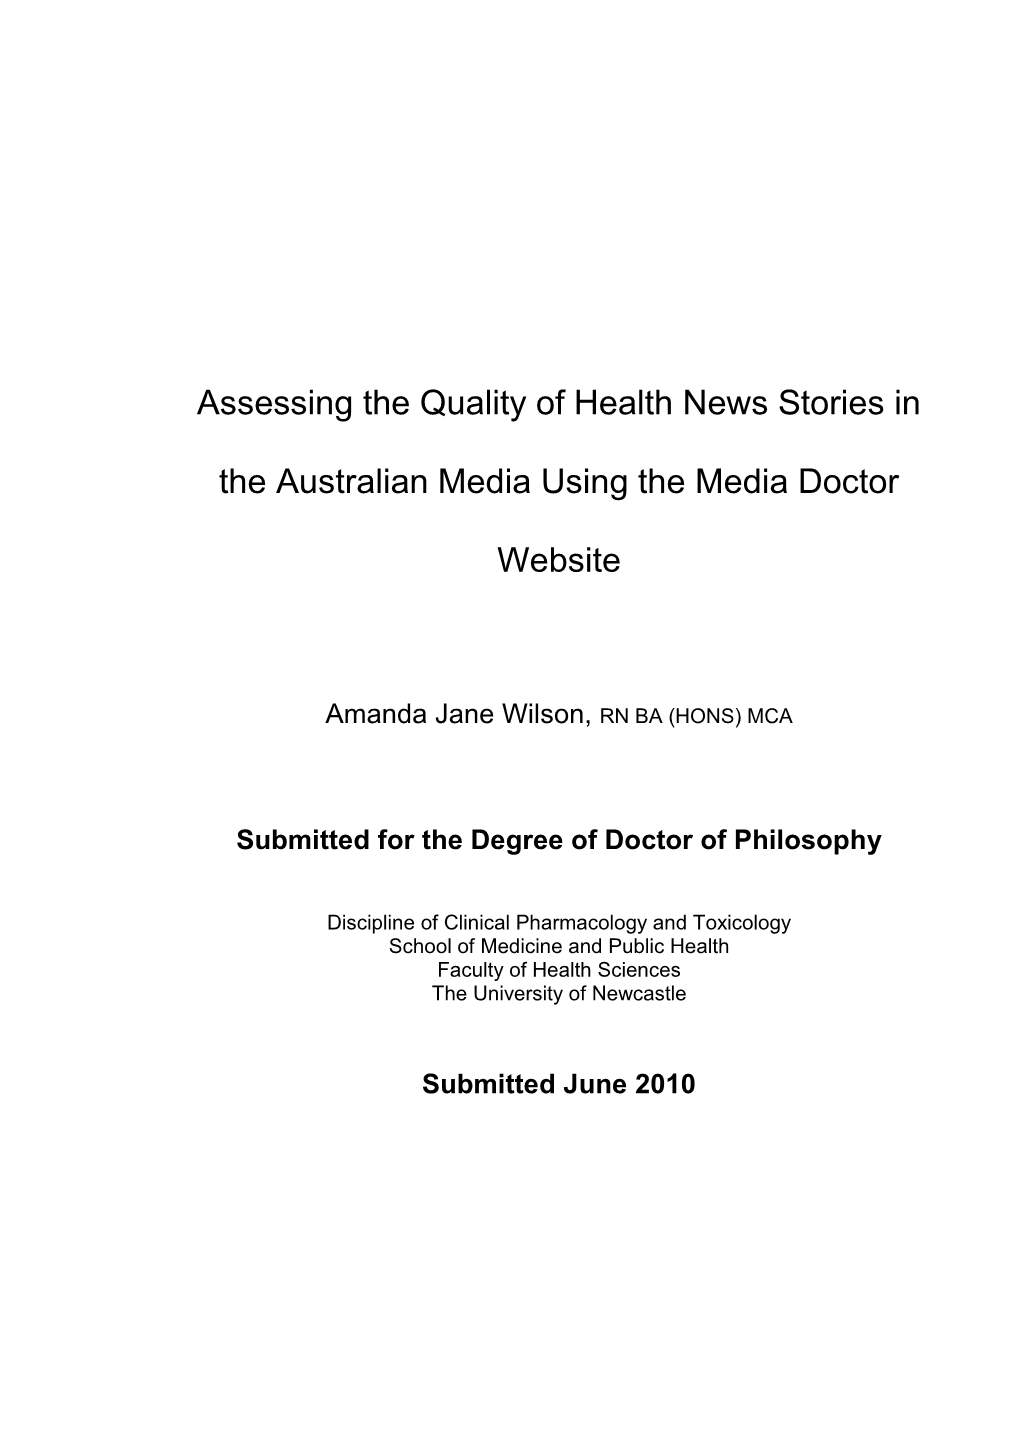 Assessing the Quality of Health News Stories in the Australian Media